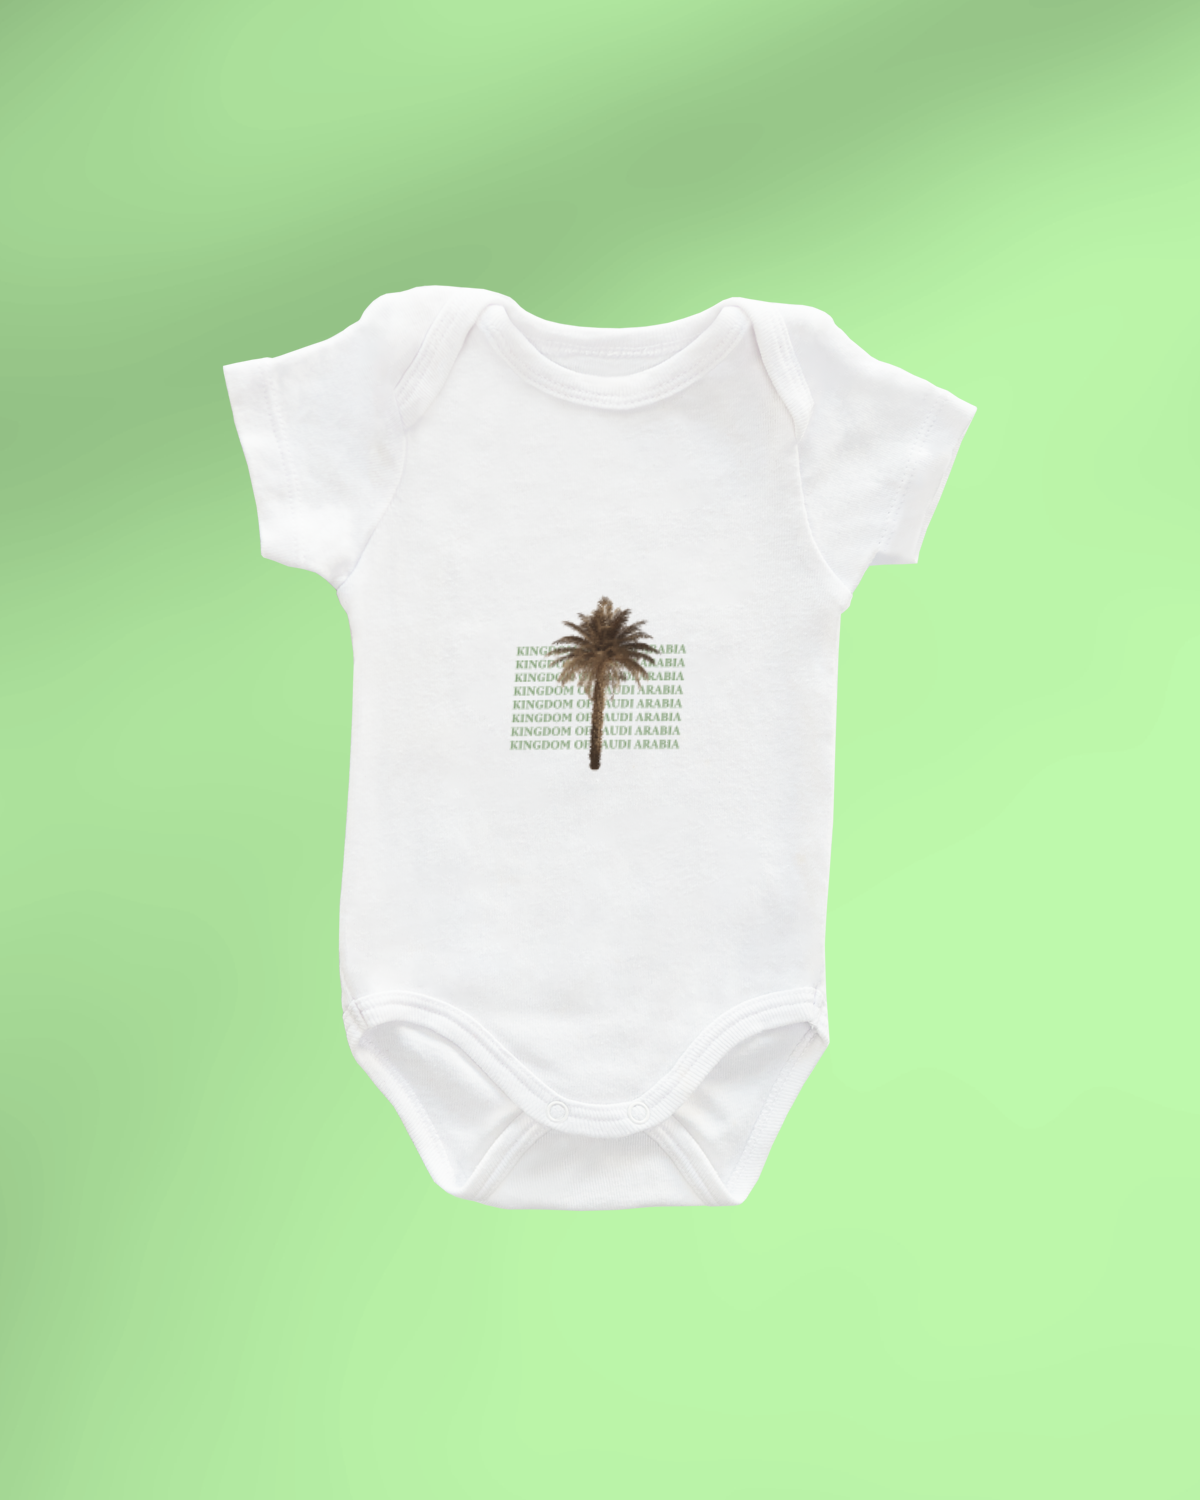 Foundation Day Baby Romper (Palm Tree)